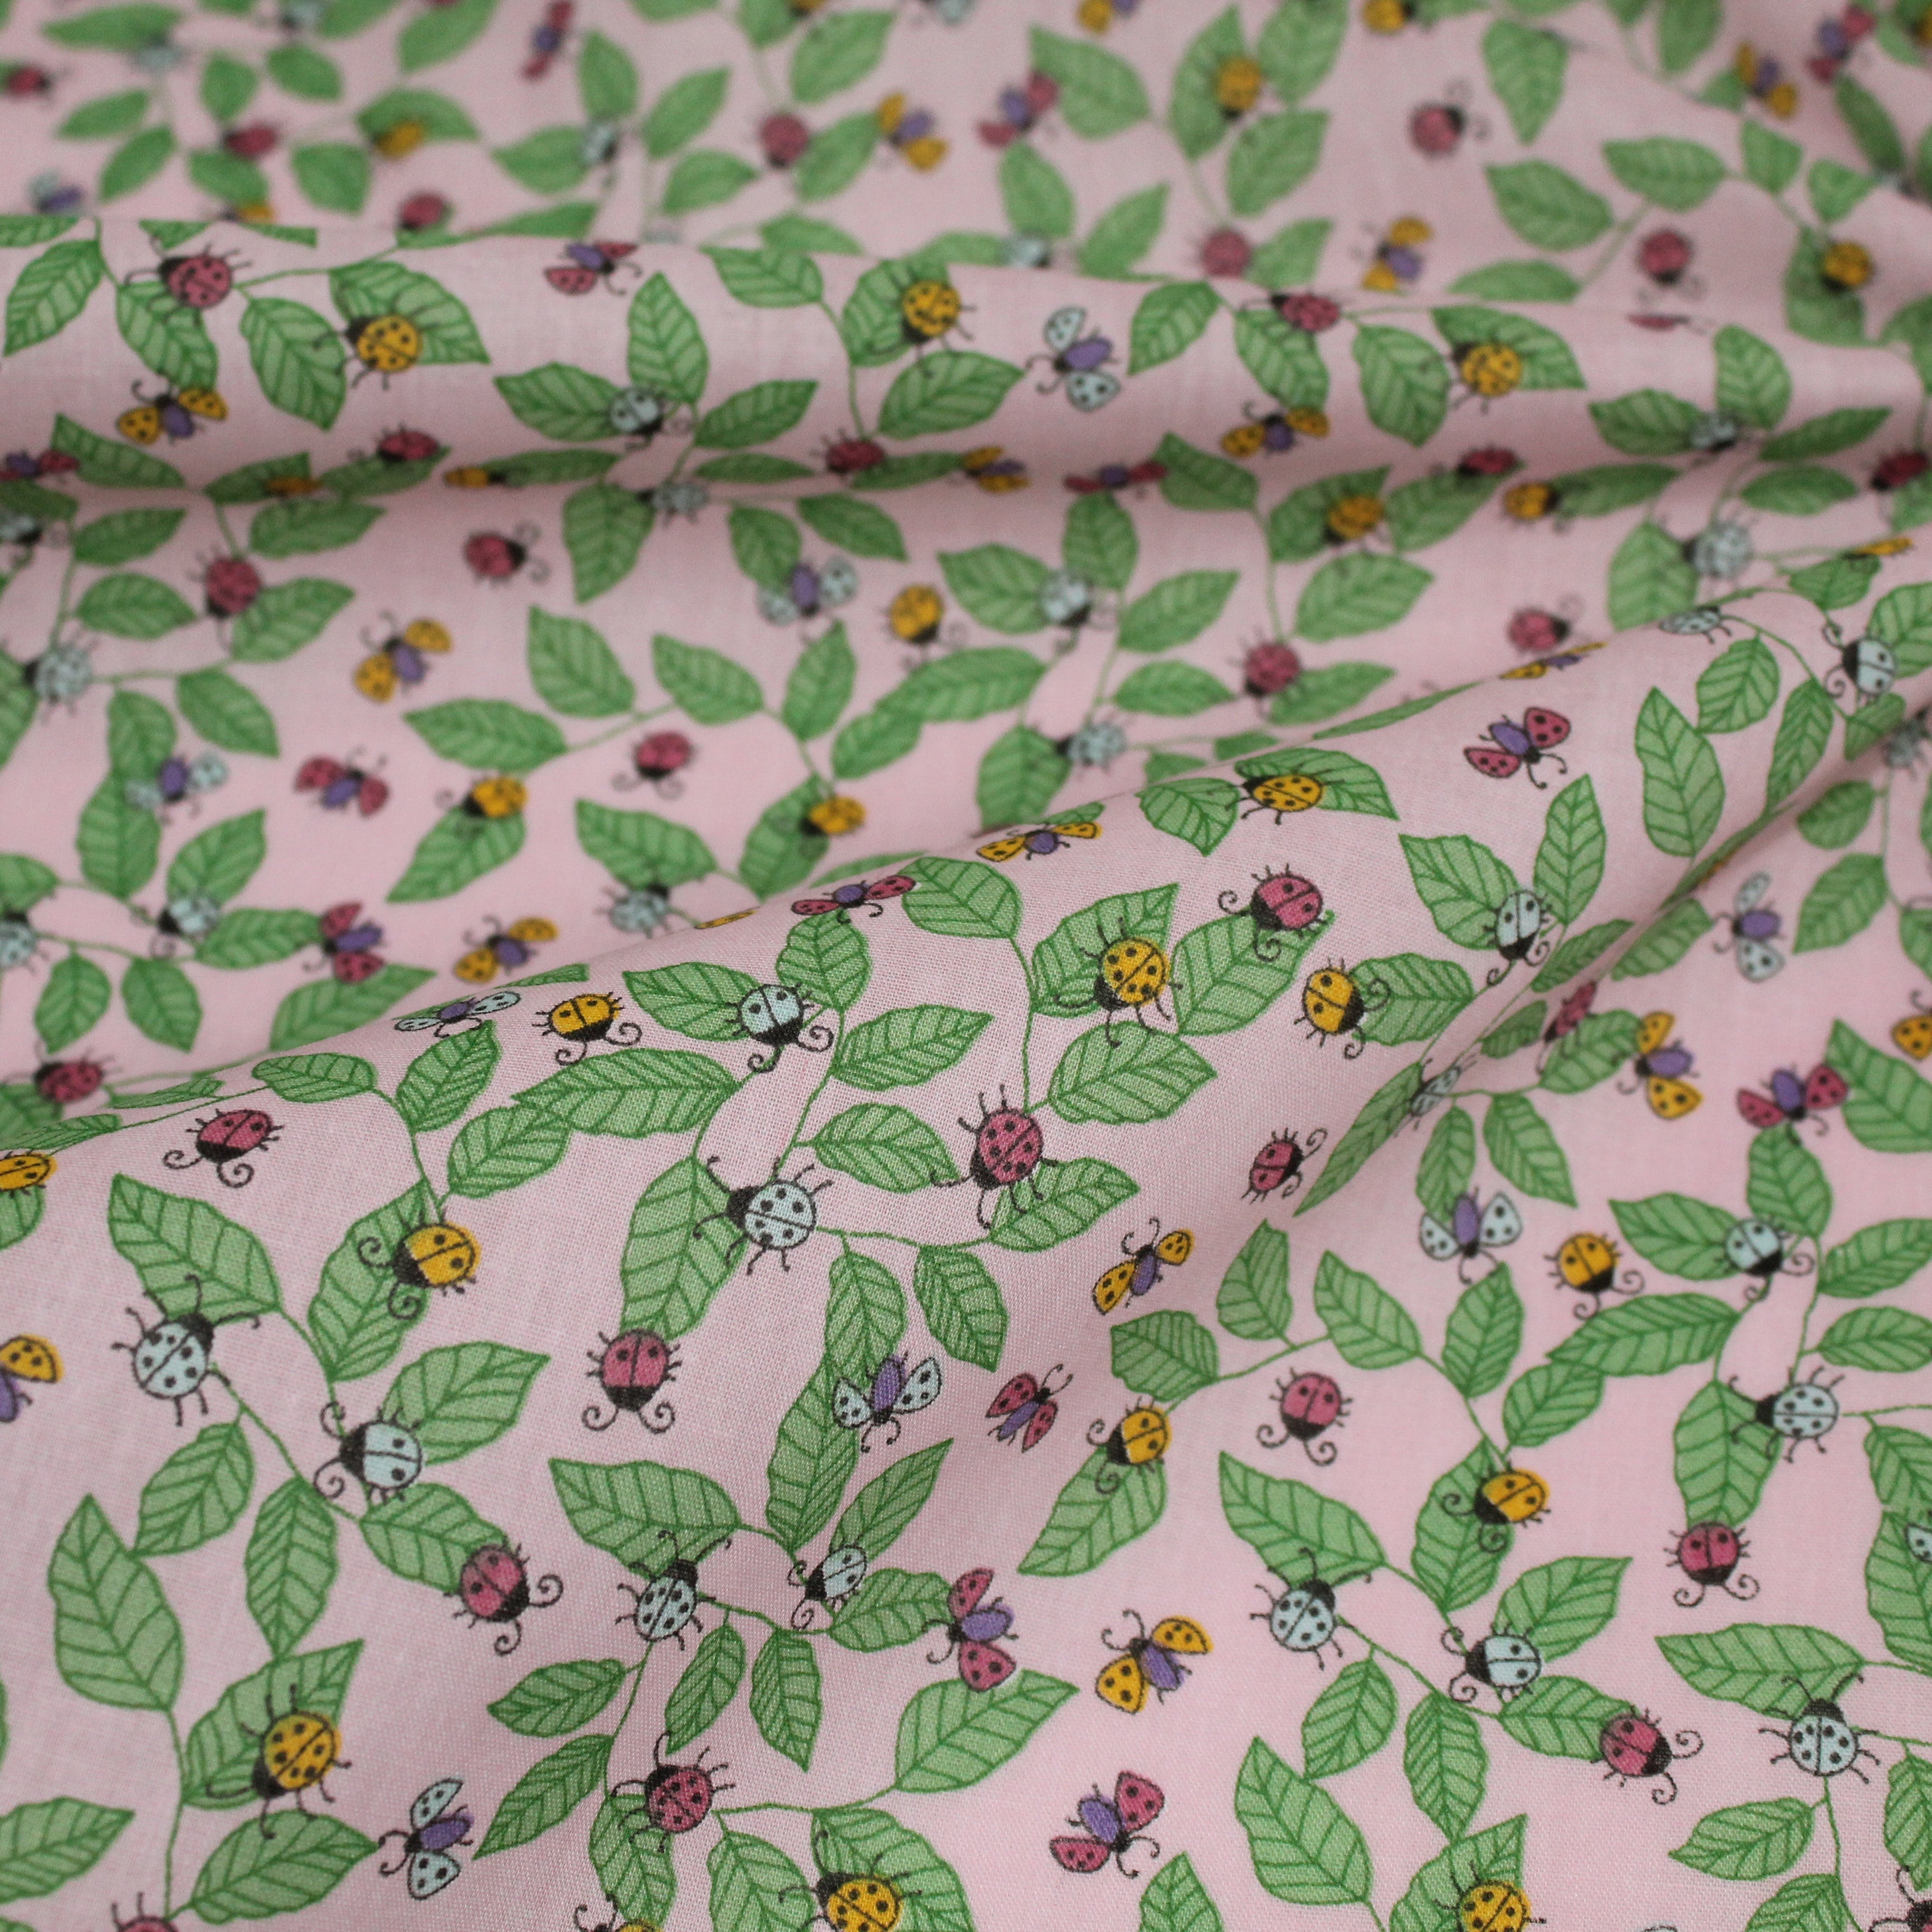 Premium Quality Poly-Cotton "Ladybird" 44" wide Pink